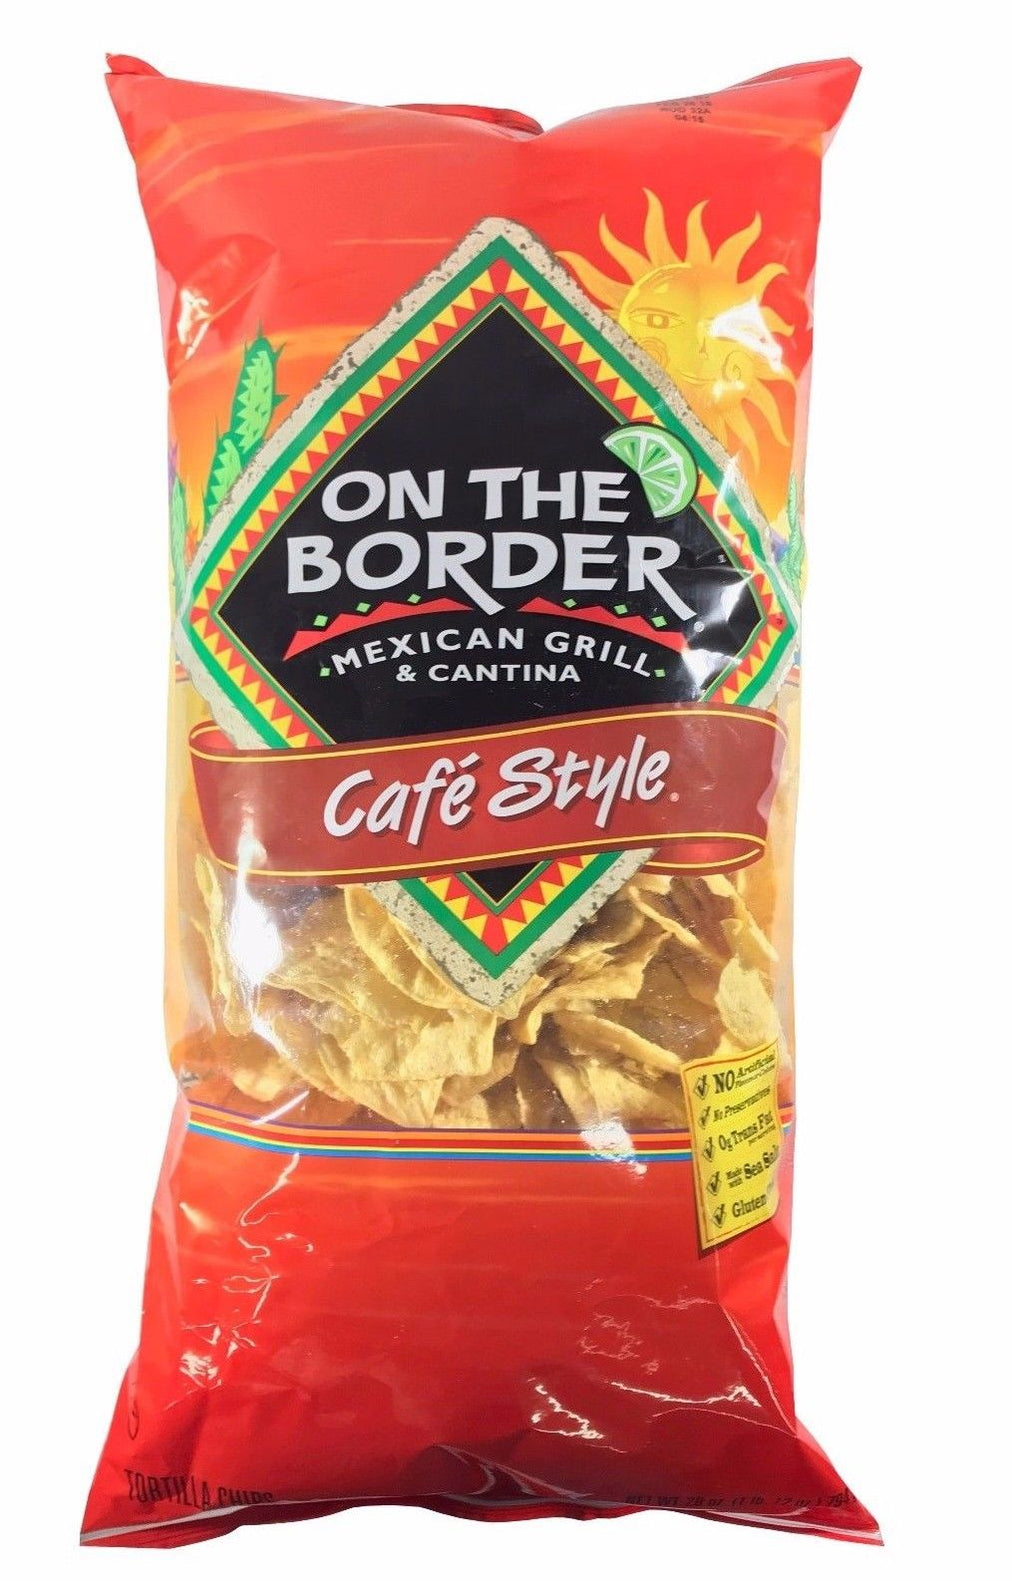 On The Border Mexican Grill & Cantina Cafe Style Tortilla Chips 28 OZ ...